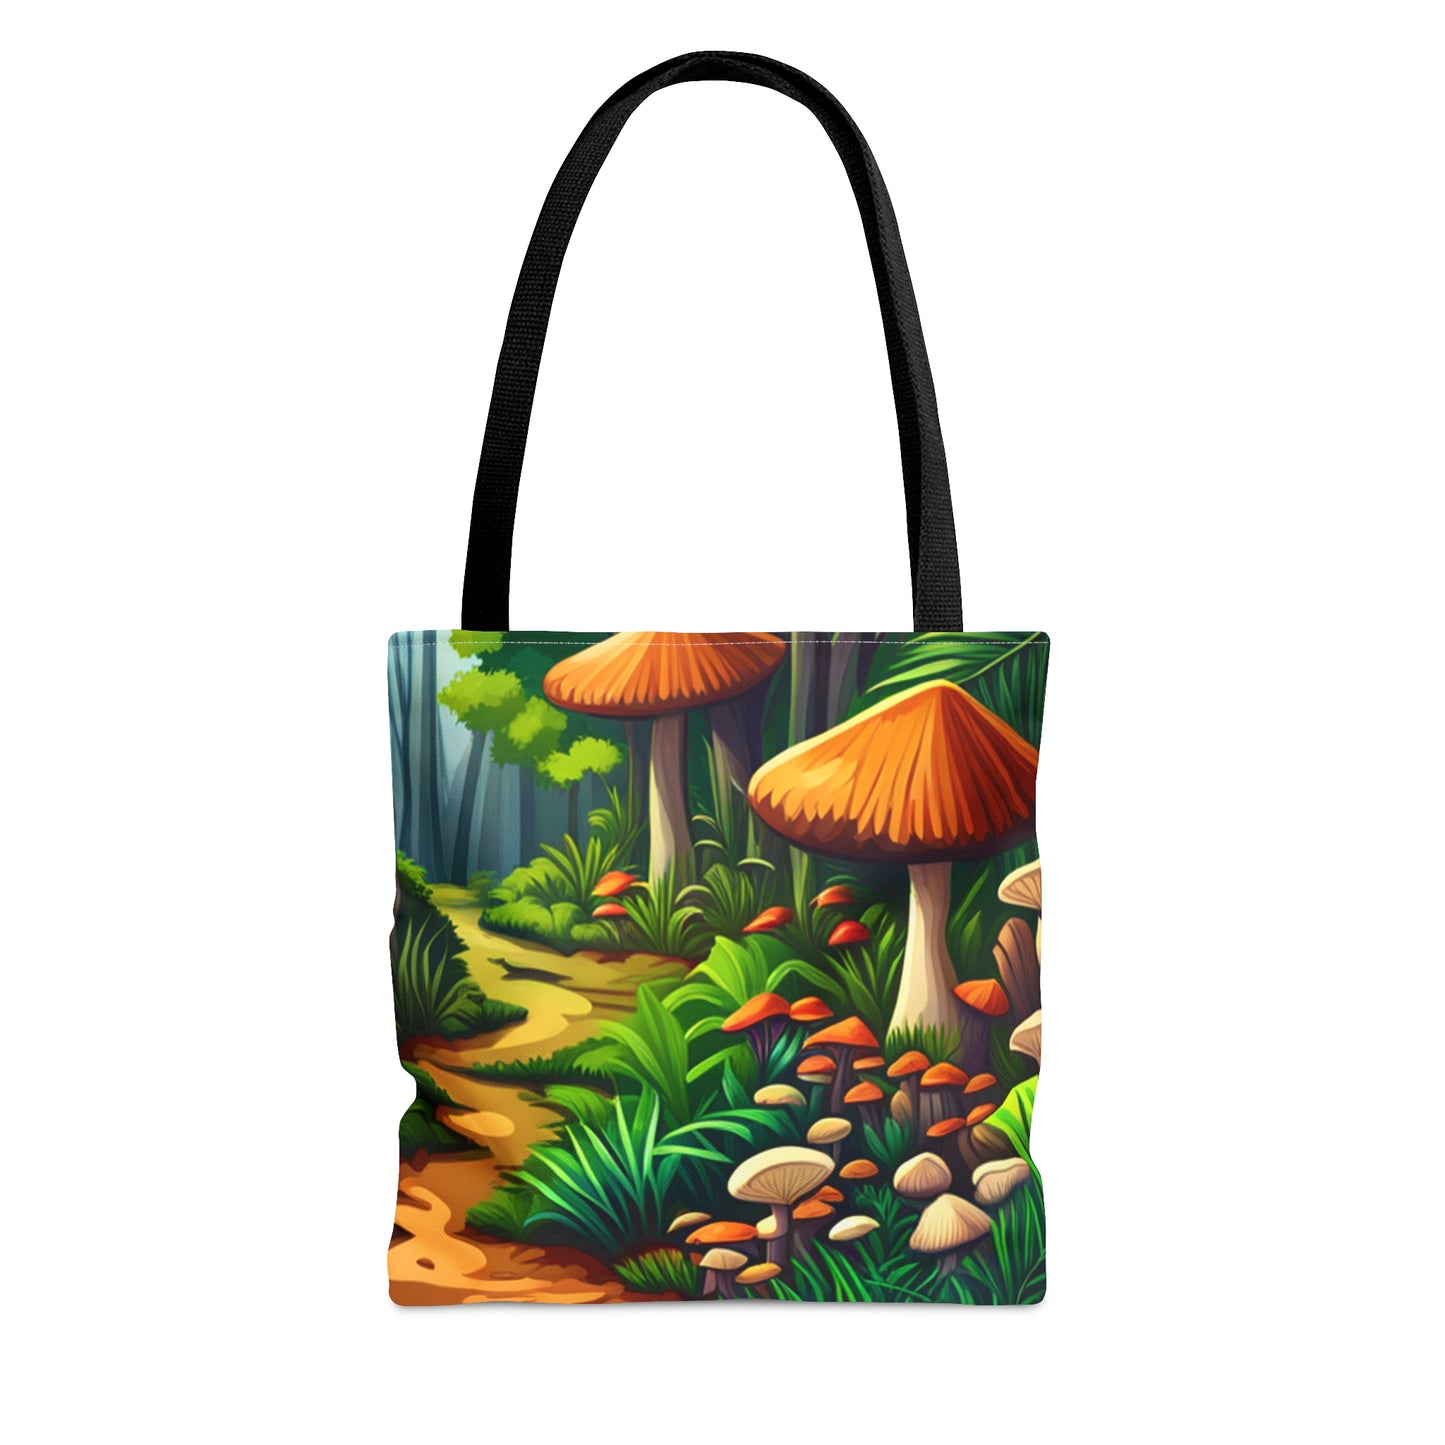 Colorful forest mushrooms Tote Bag in 3 sizes to meet your needs.